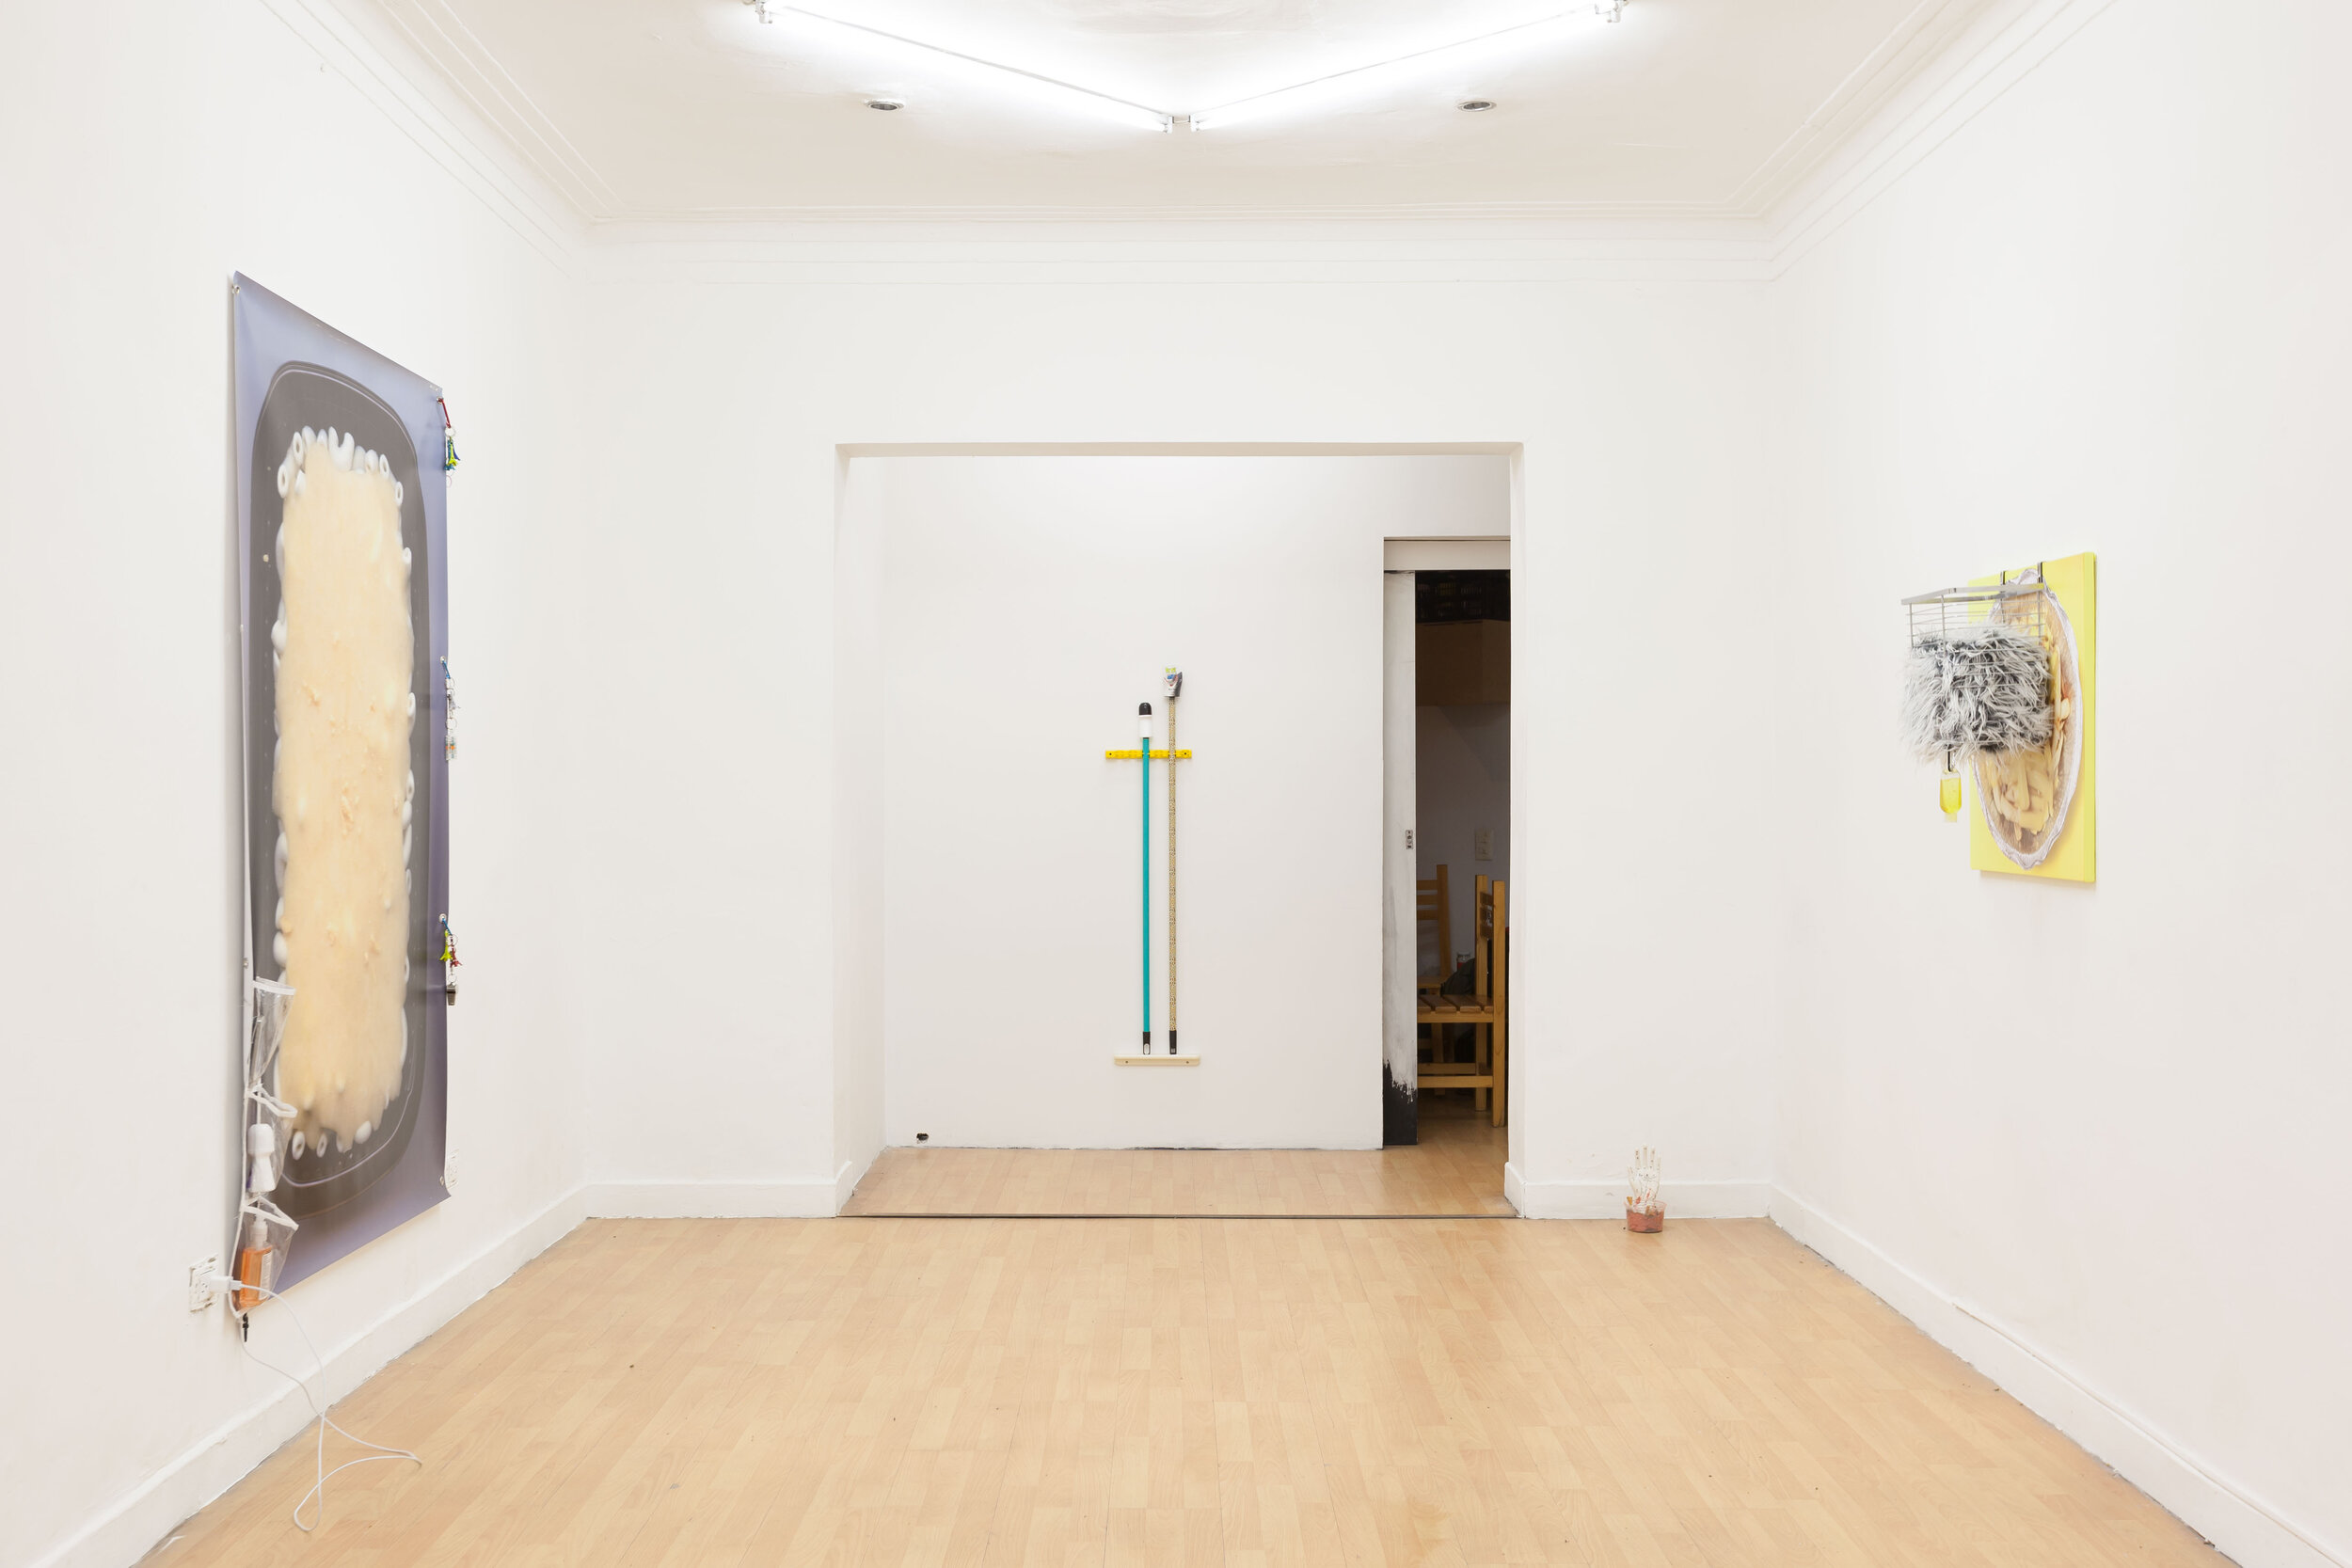 Reduced Guilt (Installation view)